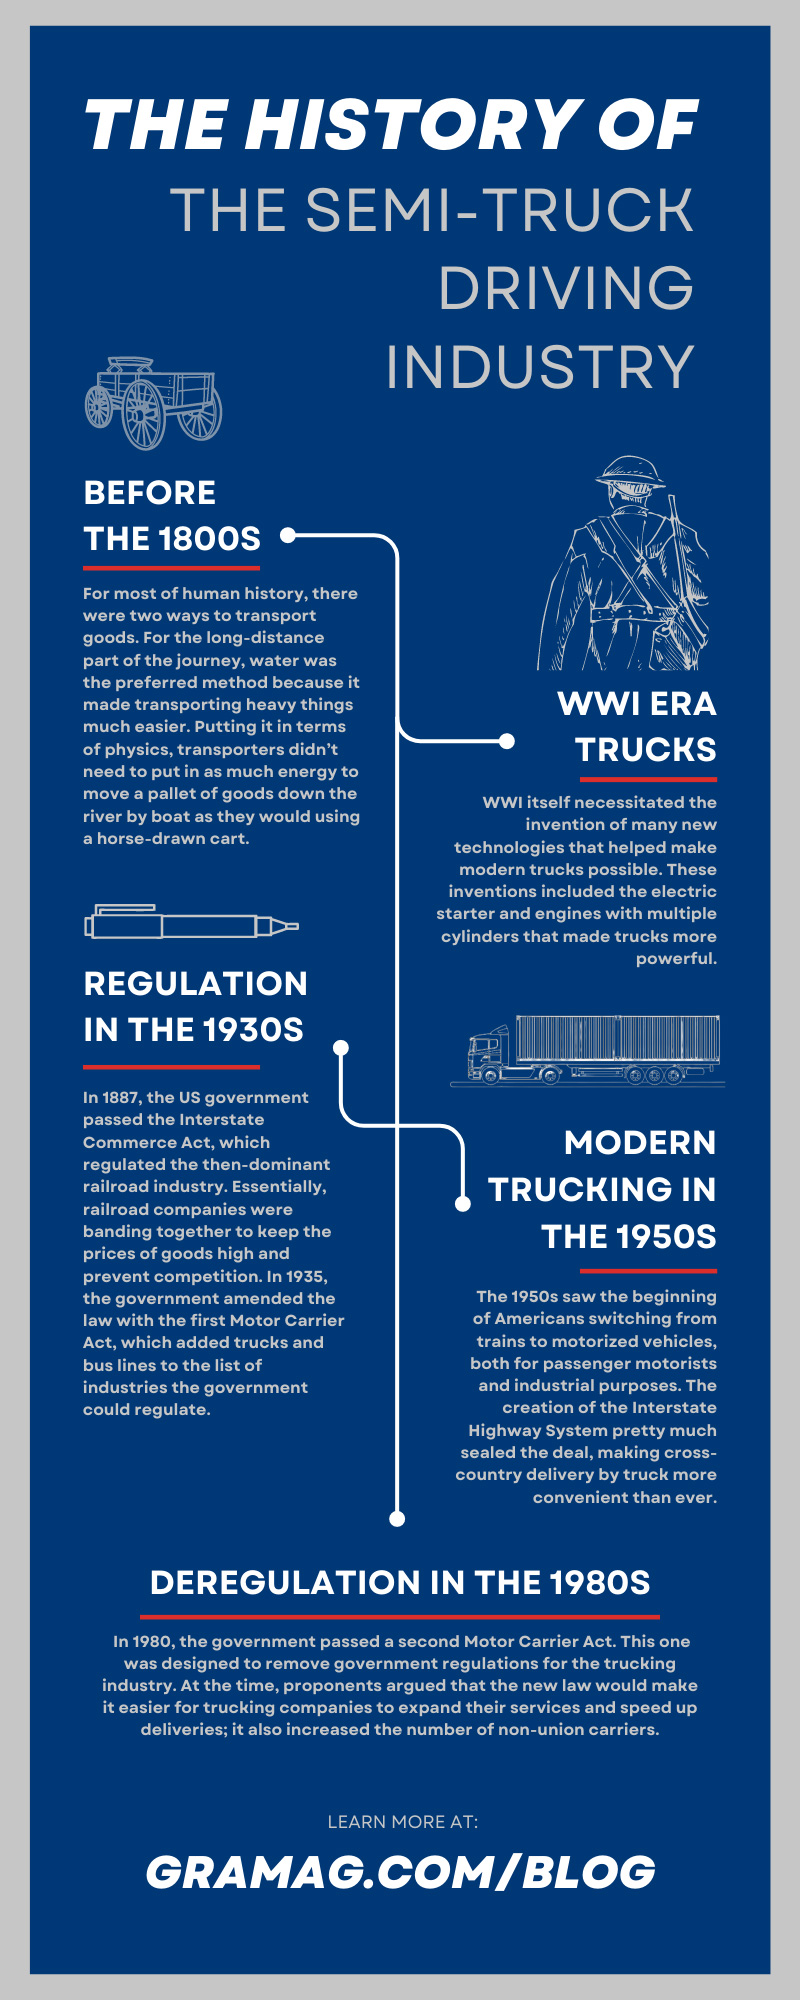 The History of the Semi-Truck Driving Industry